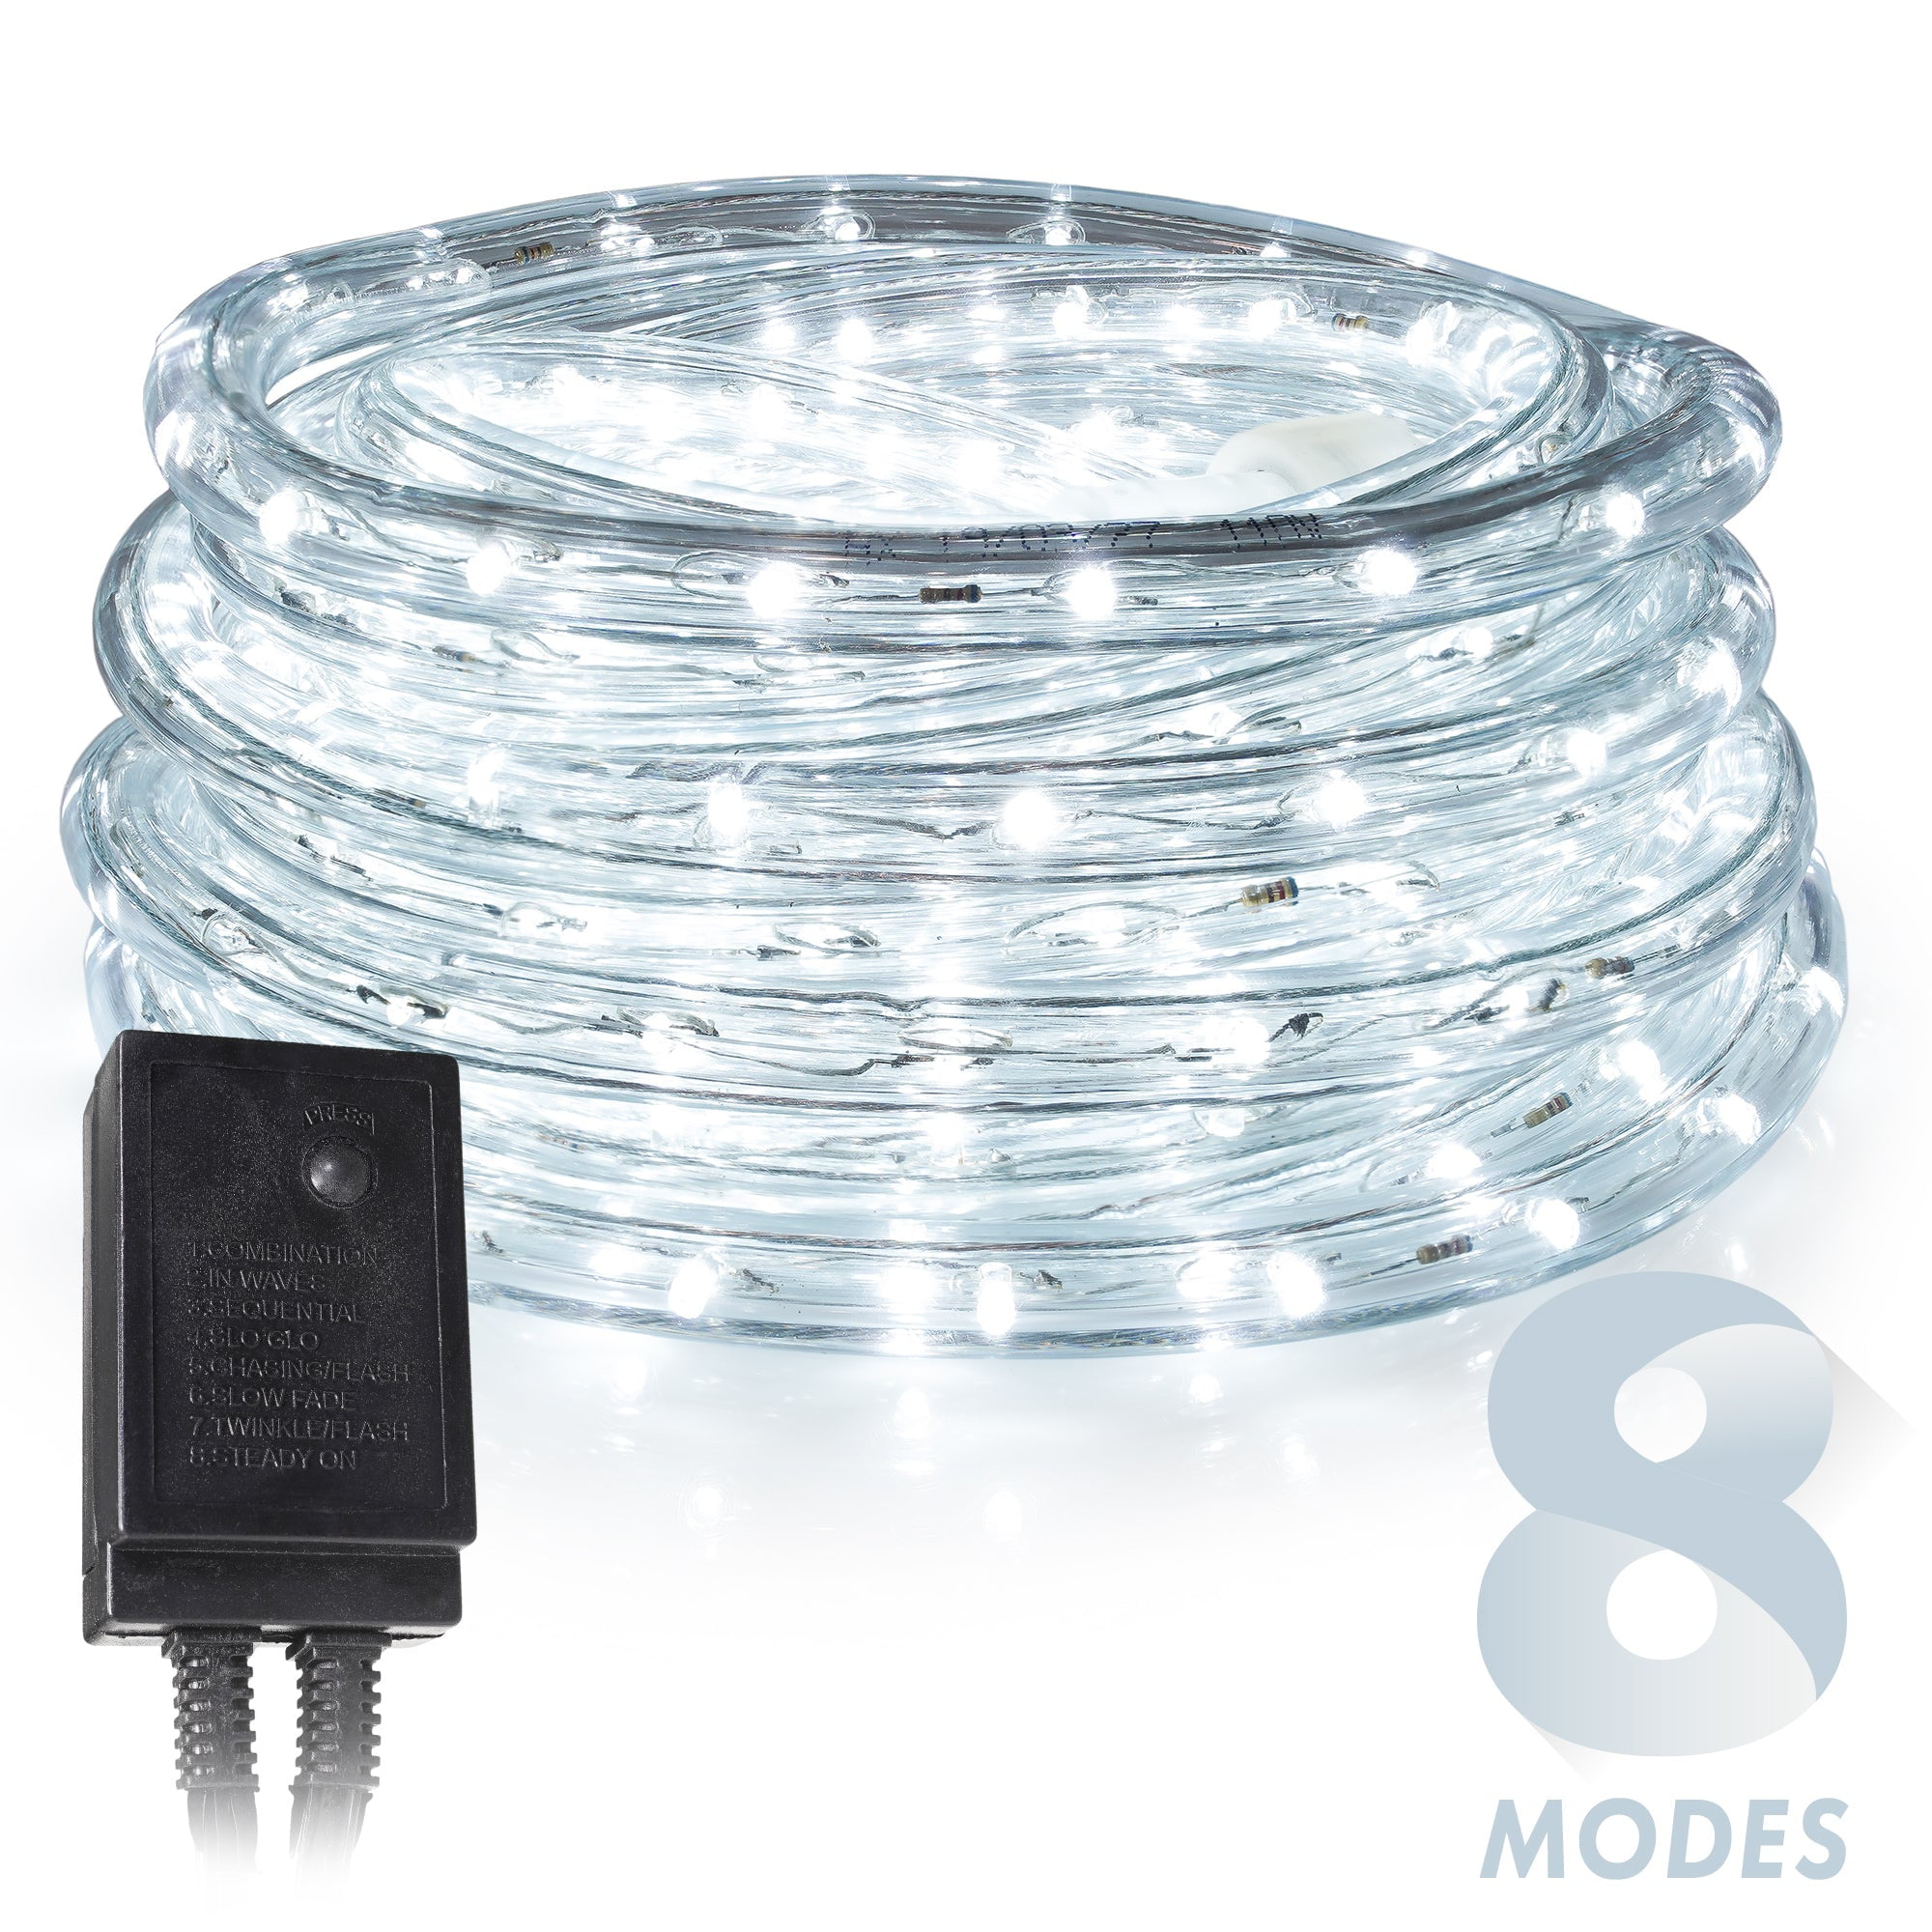 2 Wire Round 1/2 inch diameter LED Rope Light 110v 60hz Power Cord AC 